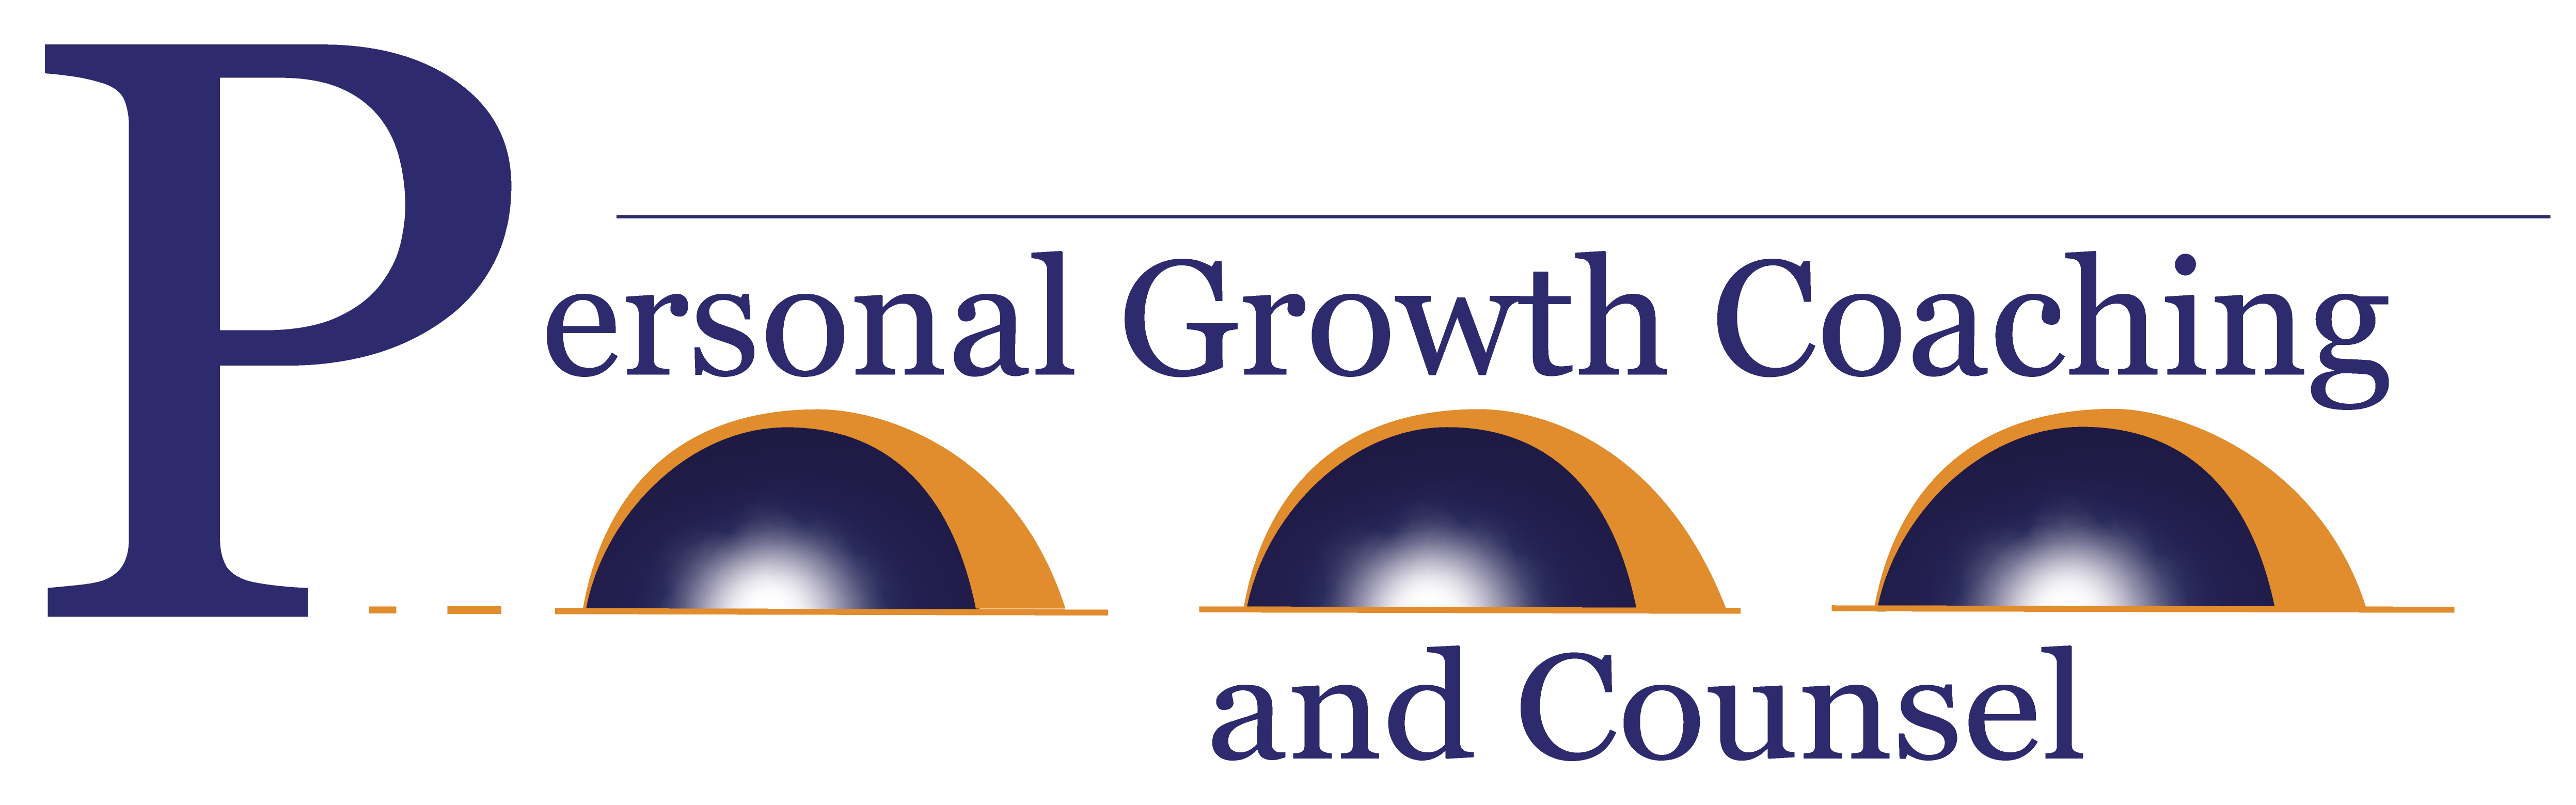 Personal Growth Coaching and Counsel Logo